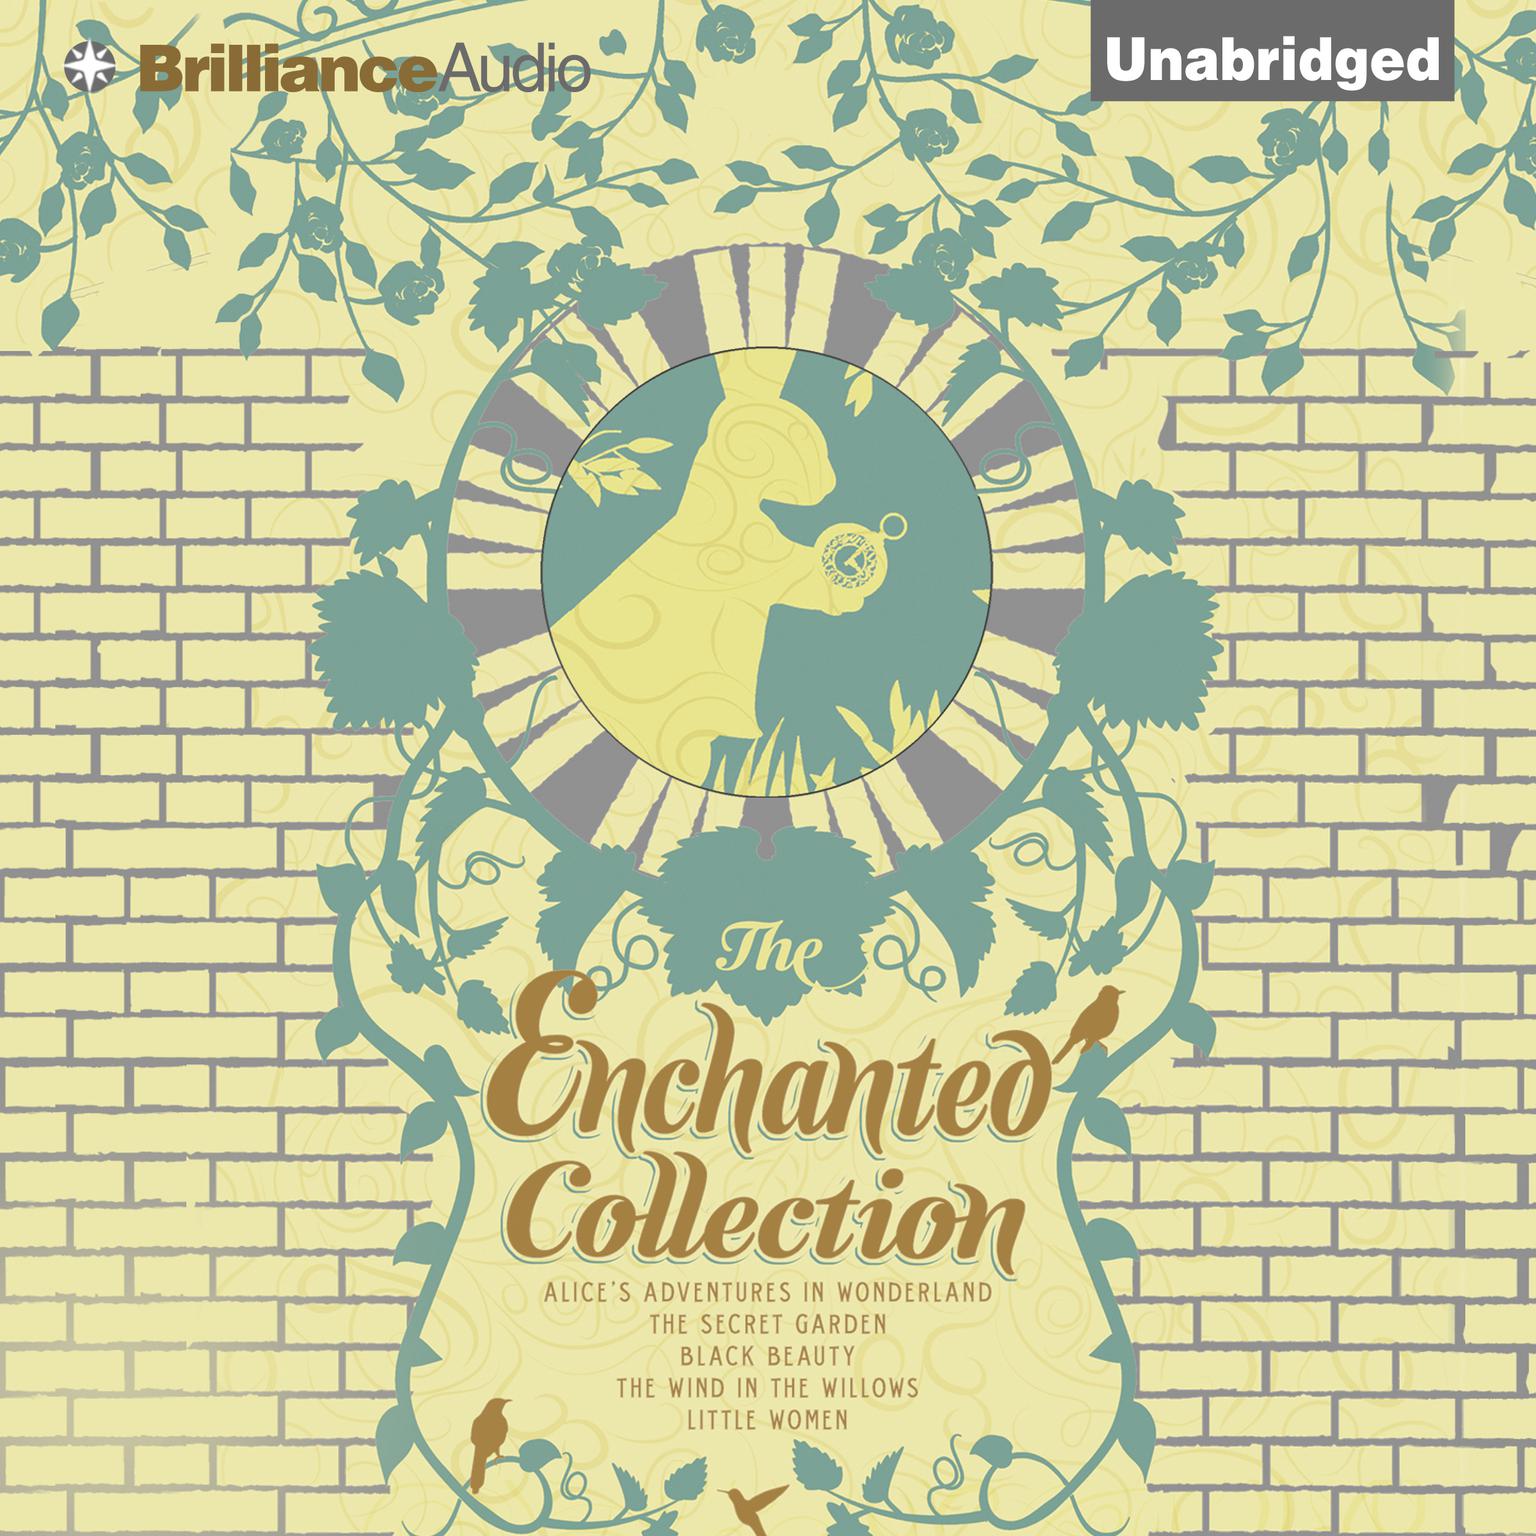 The Enchanted Collection: Alices Adventures in Wonderland, The Secret Garden, Black Beauty, The Wind in the Willows, Little Women Audiobook, by Lewis Carroll